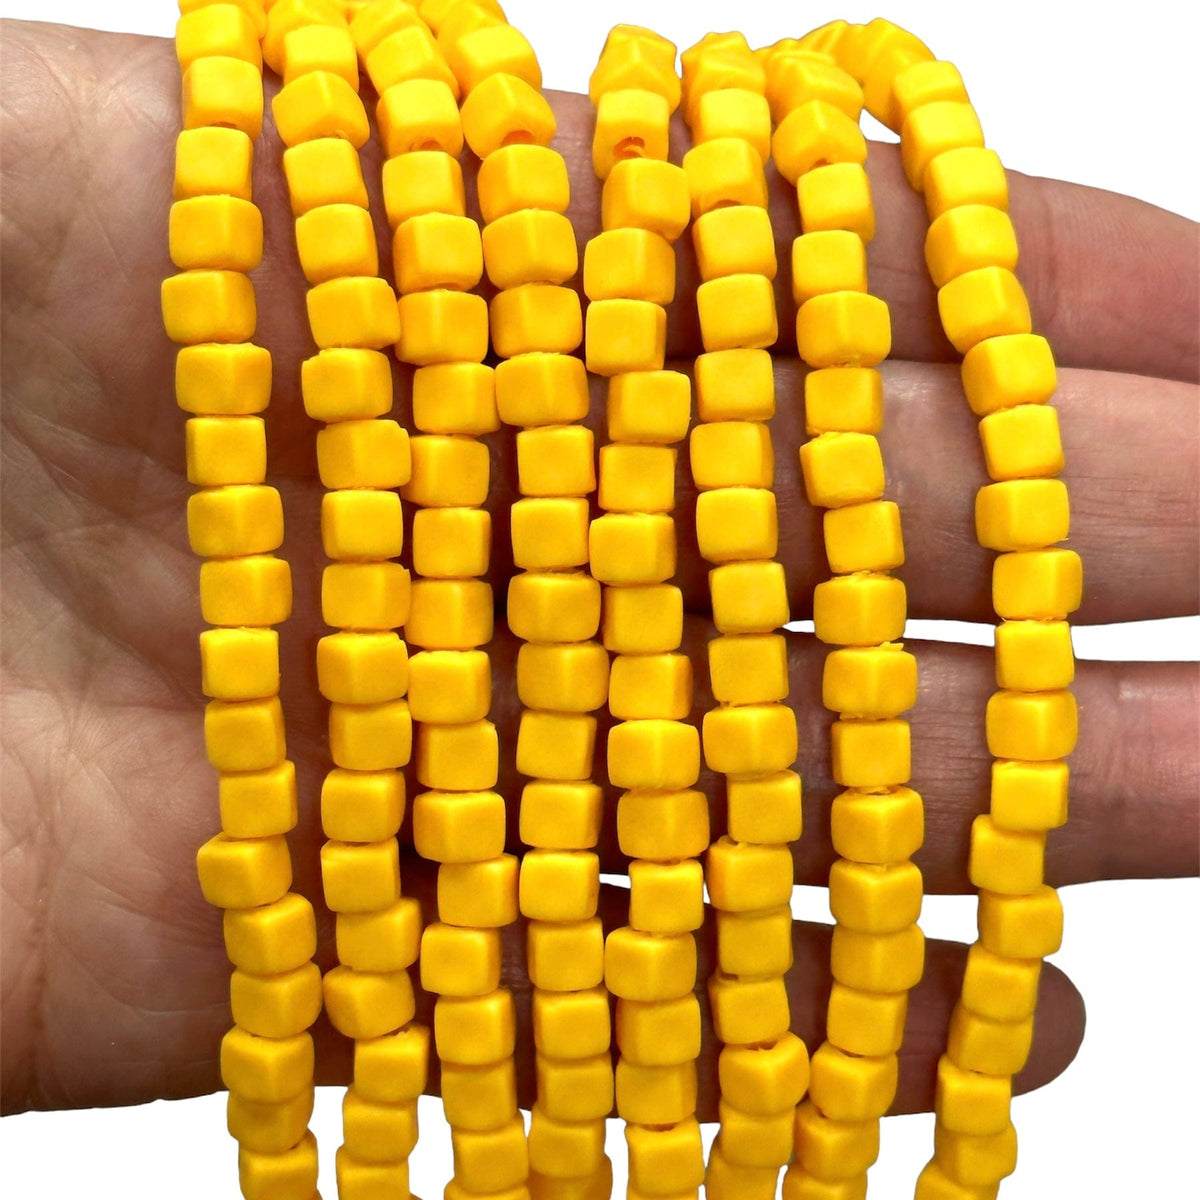 4mm 330pcs/Strip Yellow Clay Beads Slice Clay Spacer Beads Polymer